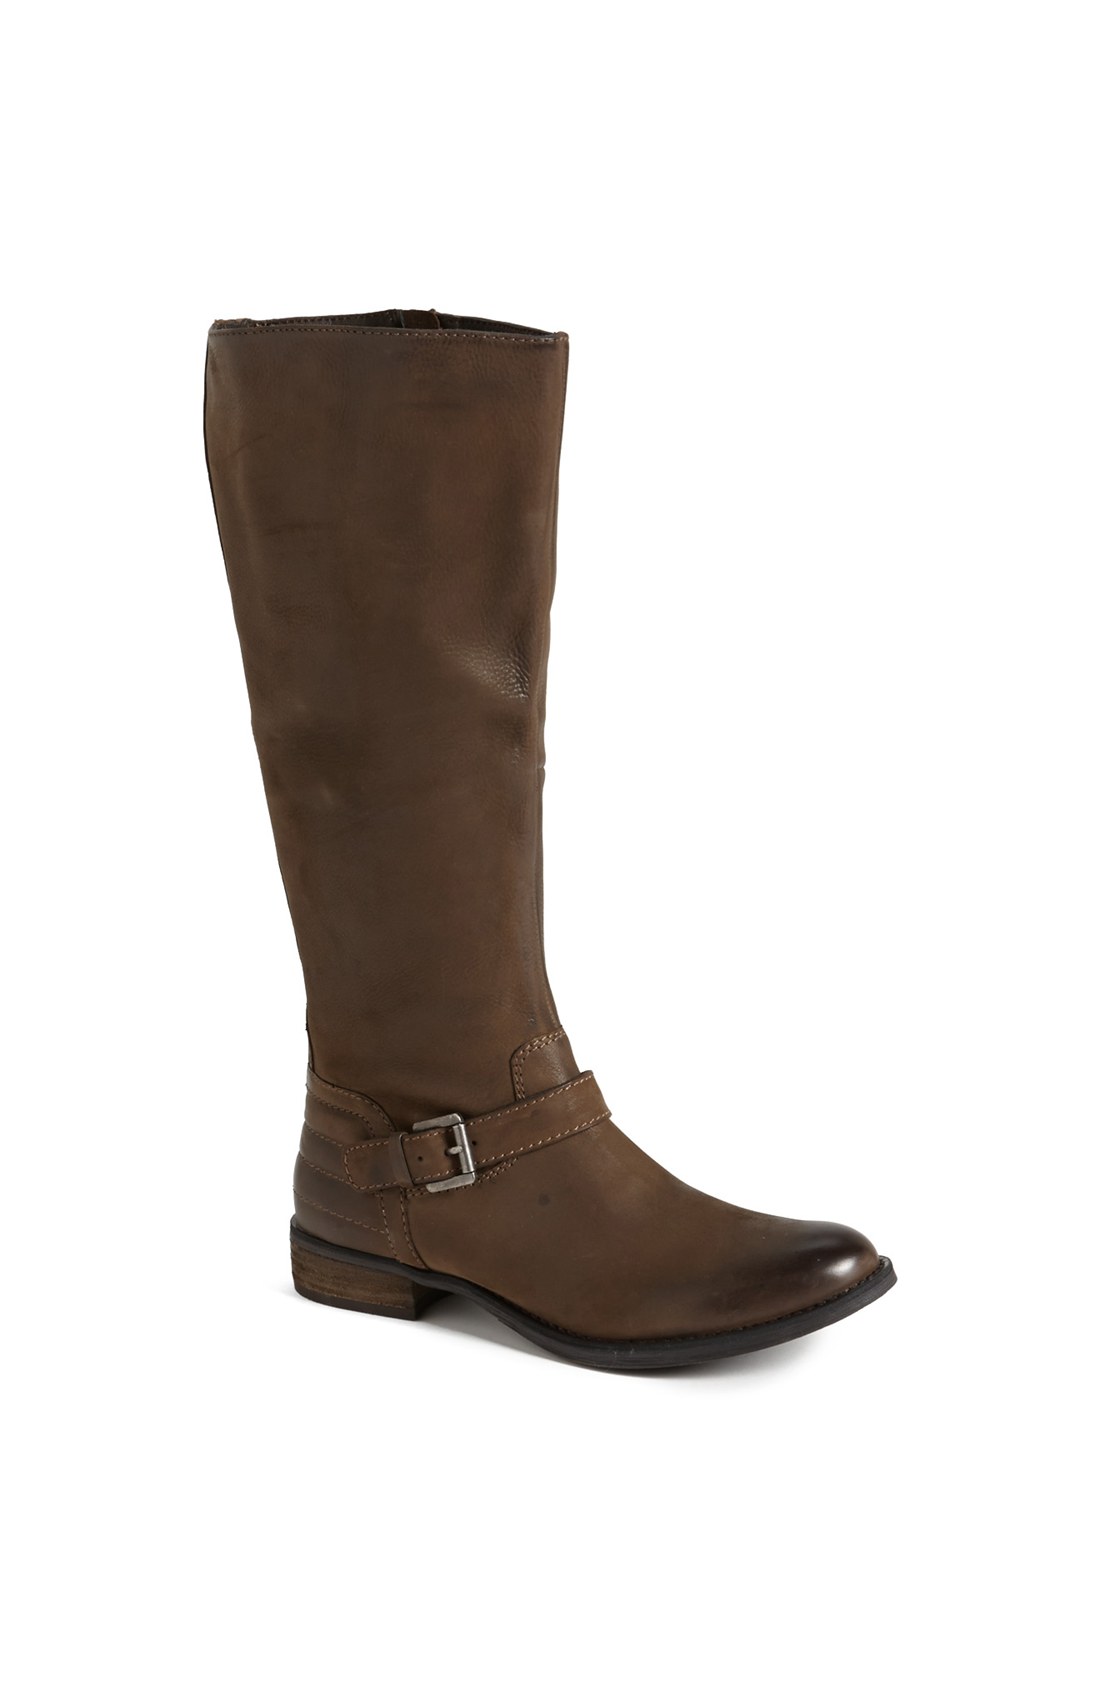 Steve madden Saretoga Leather Moto Boot in Brown (Taupe